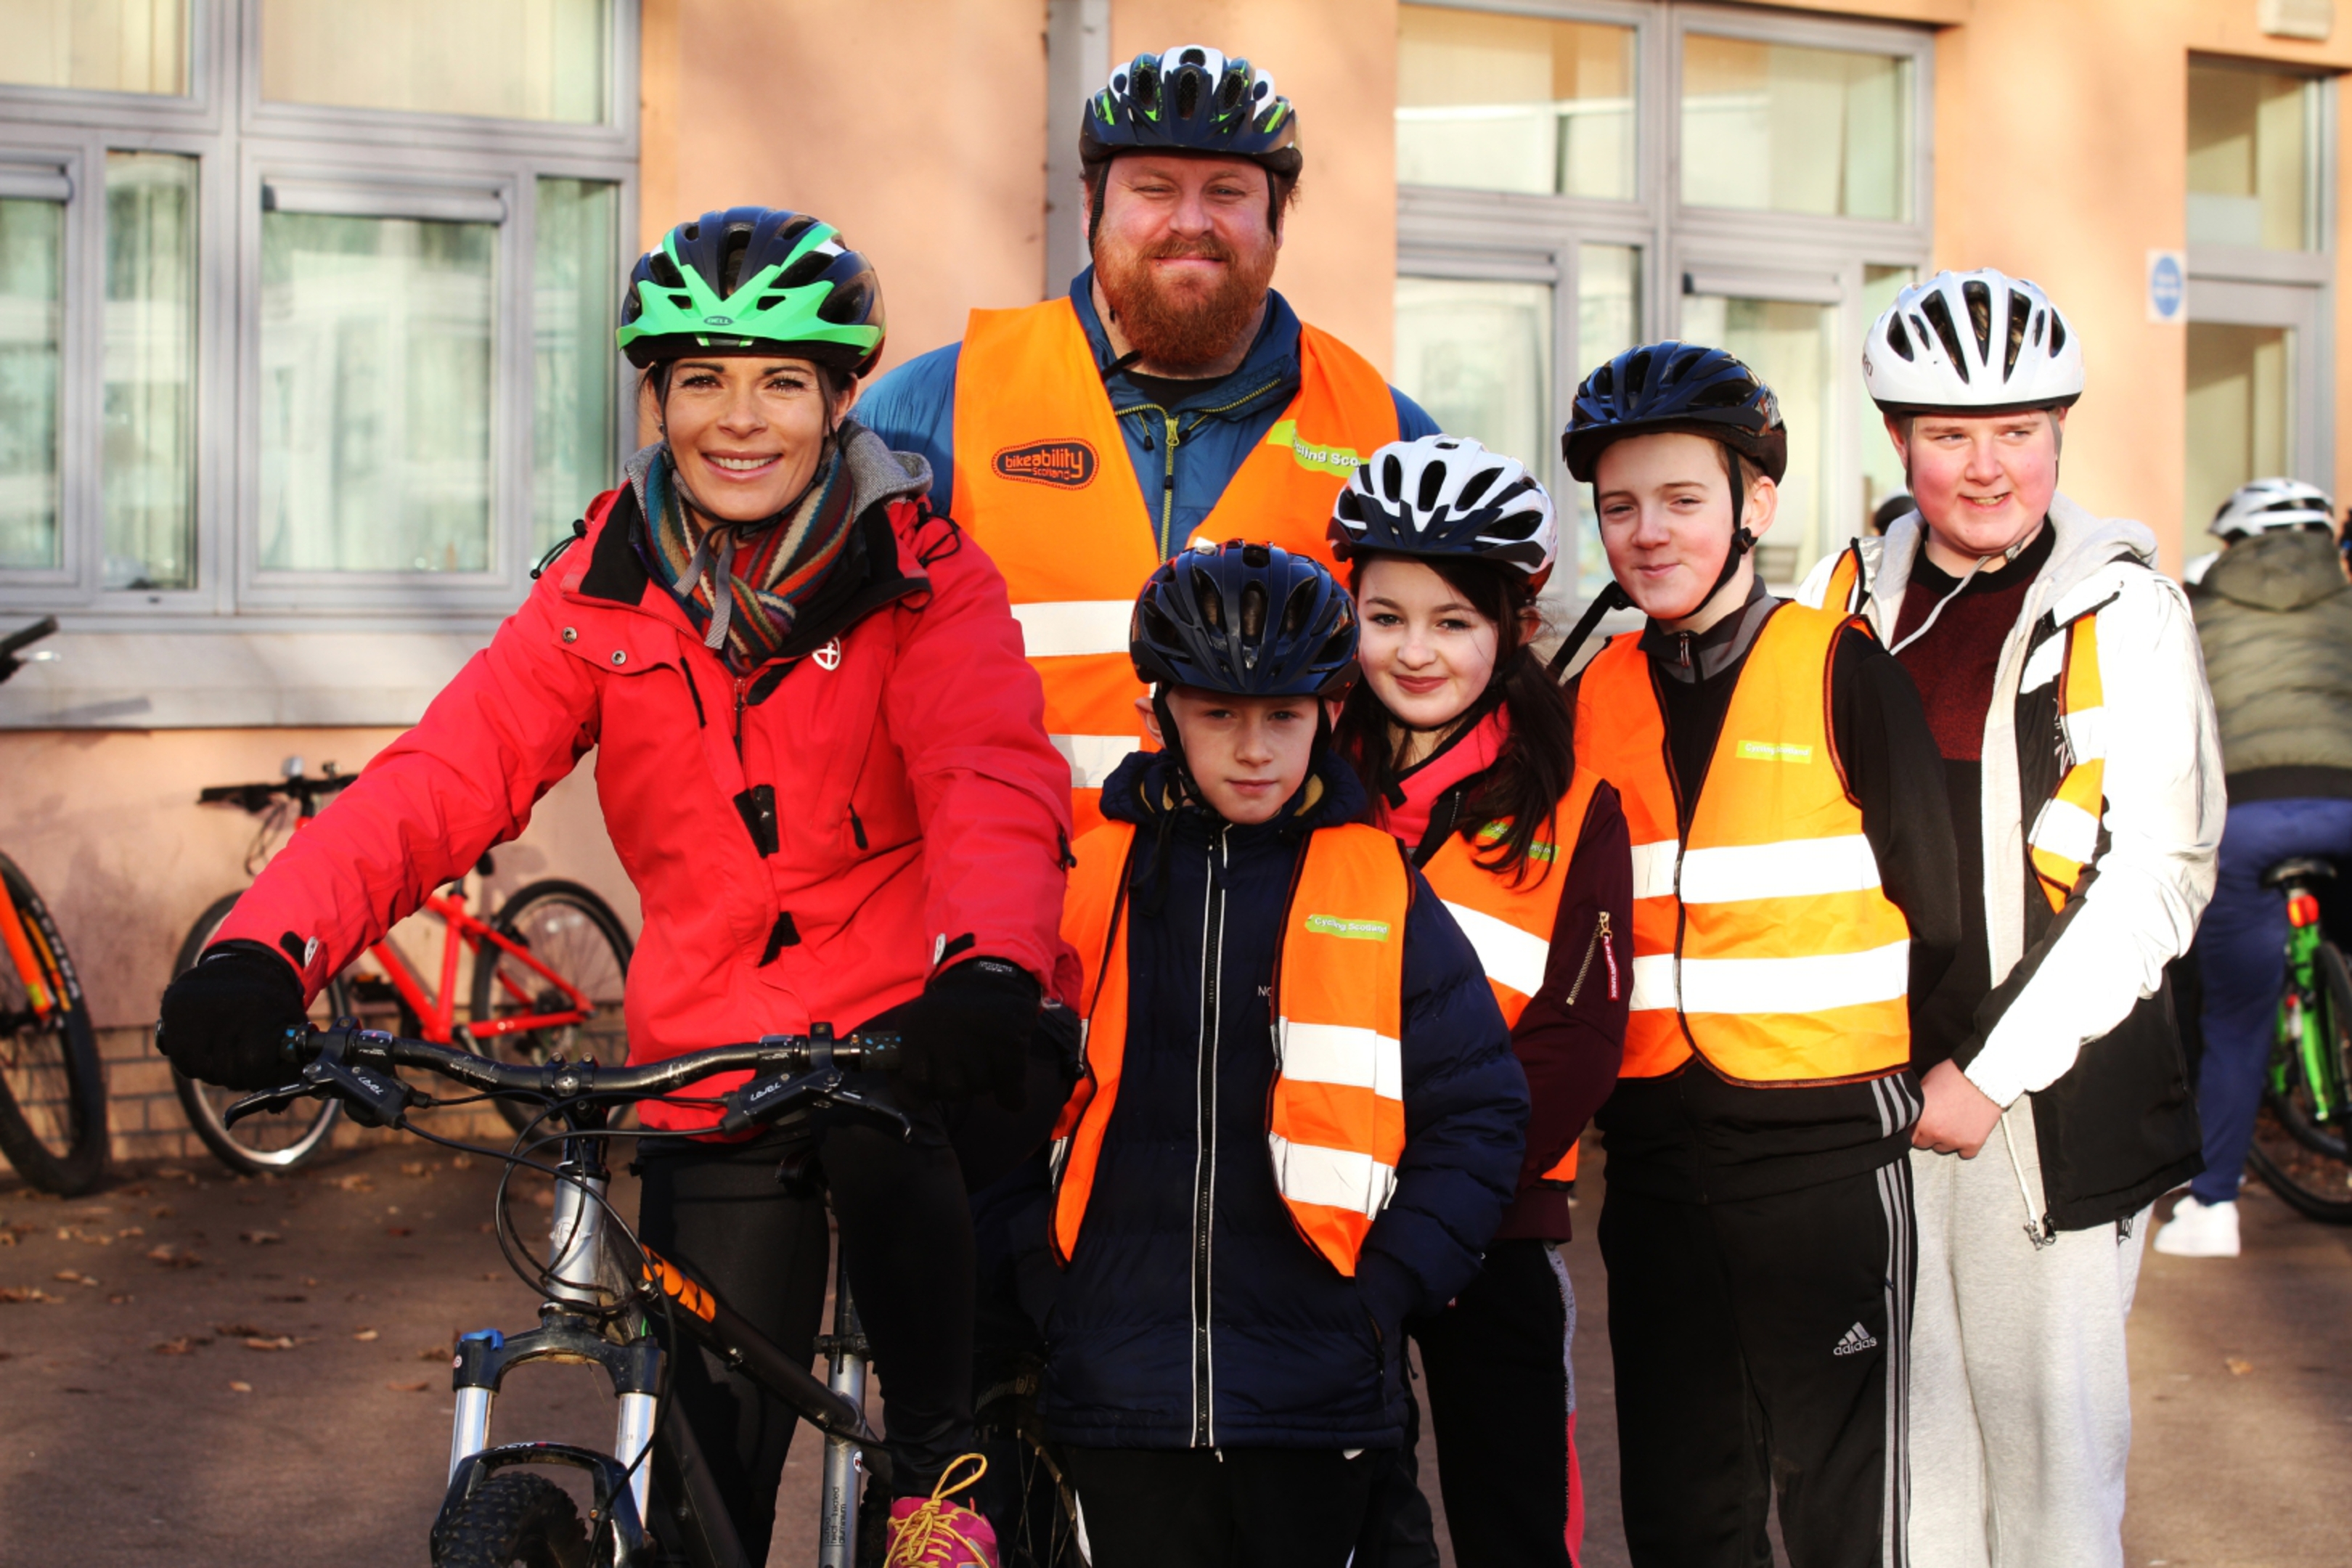 Pupils at Ballumbie Primary School enjoy a bikeability session with Grant Pettigrew and Gayle Ritchie.